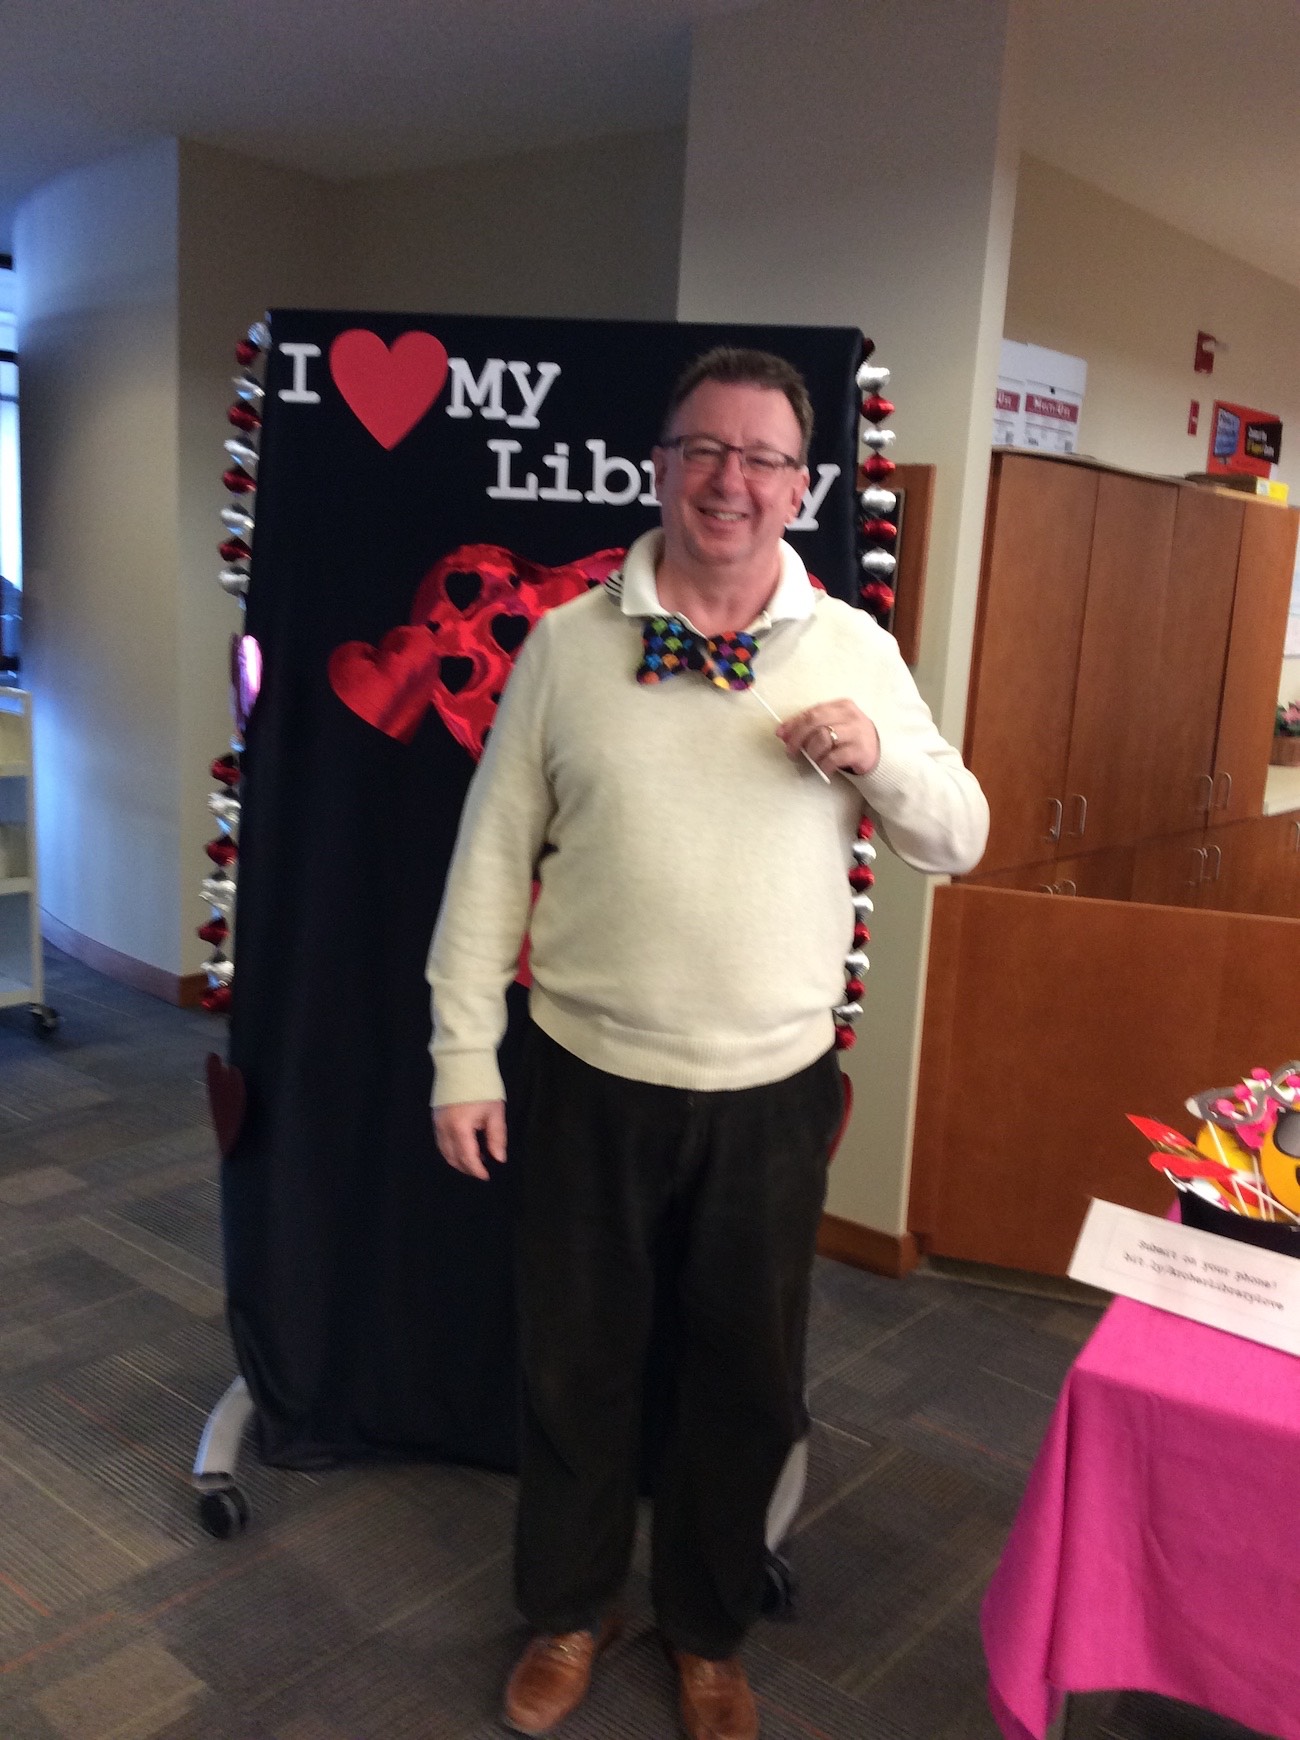 University Librarian Brett Waytuck stands in front of the I love my library backdrop holding up a prop polkadotted bowtie on a stick and smiling